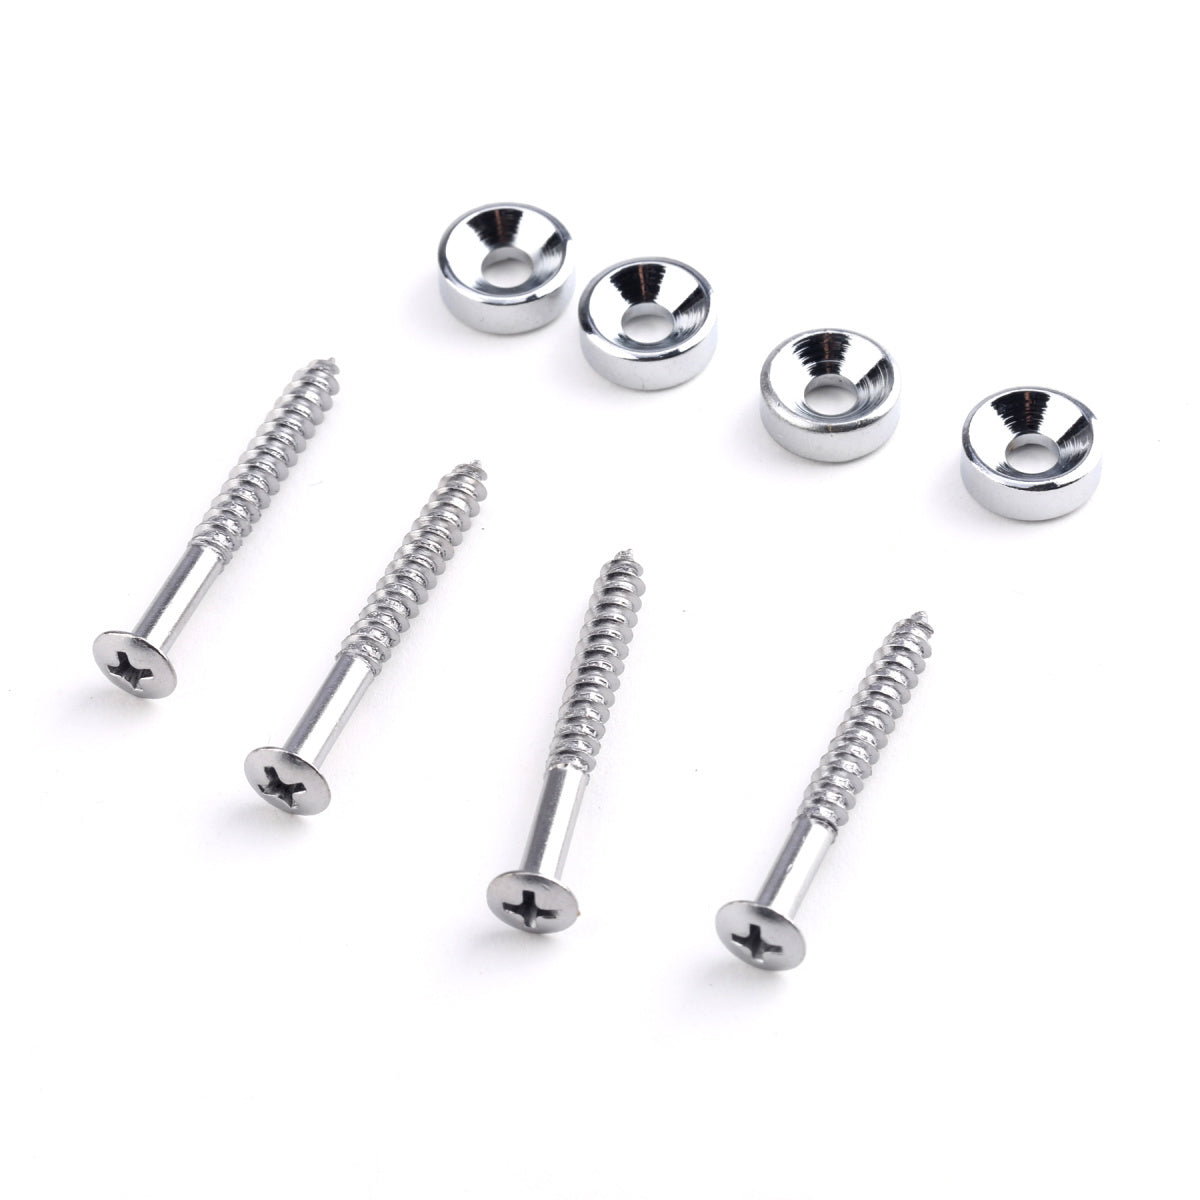 Musiclily Electric Guitar Bass Neck Joint Bushings & Bolts,Chrome (4 Pieces)